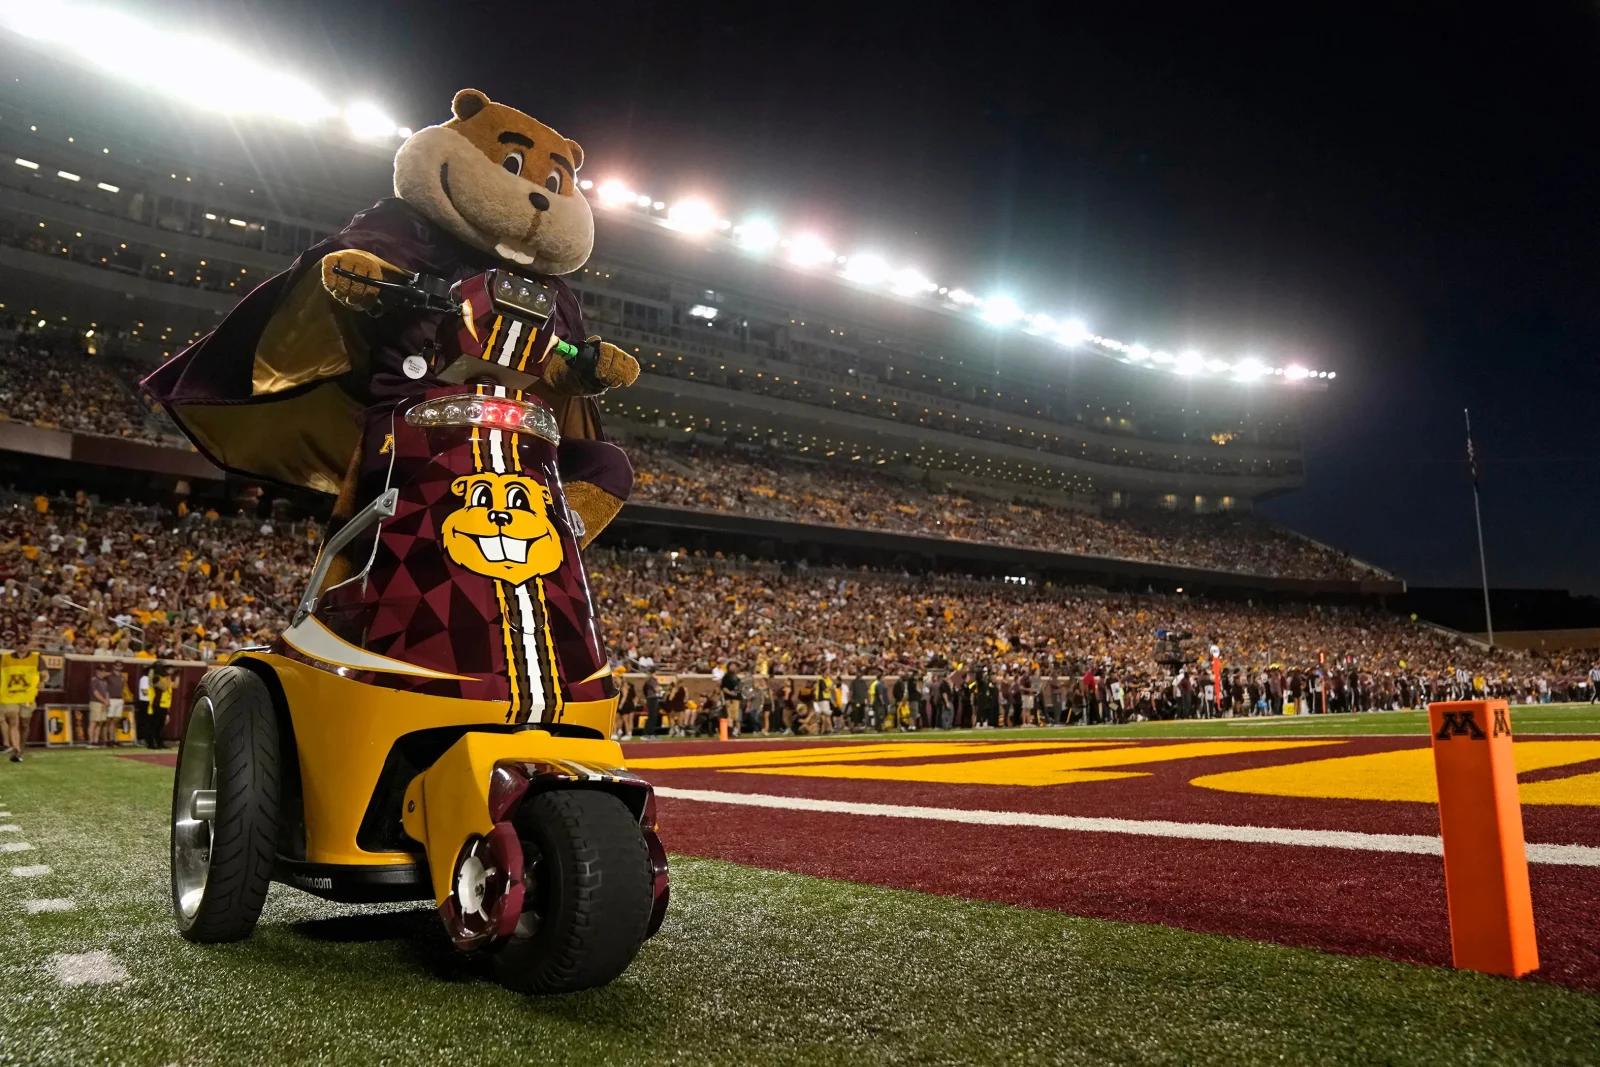 a mascot gopher rides a motor bike during a football game